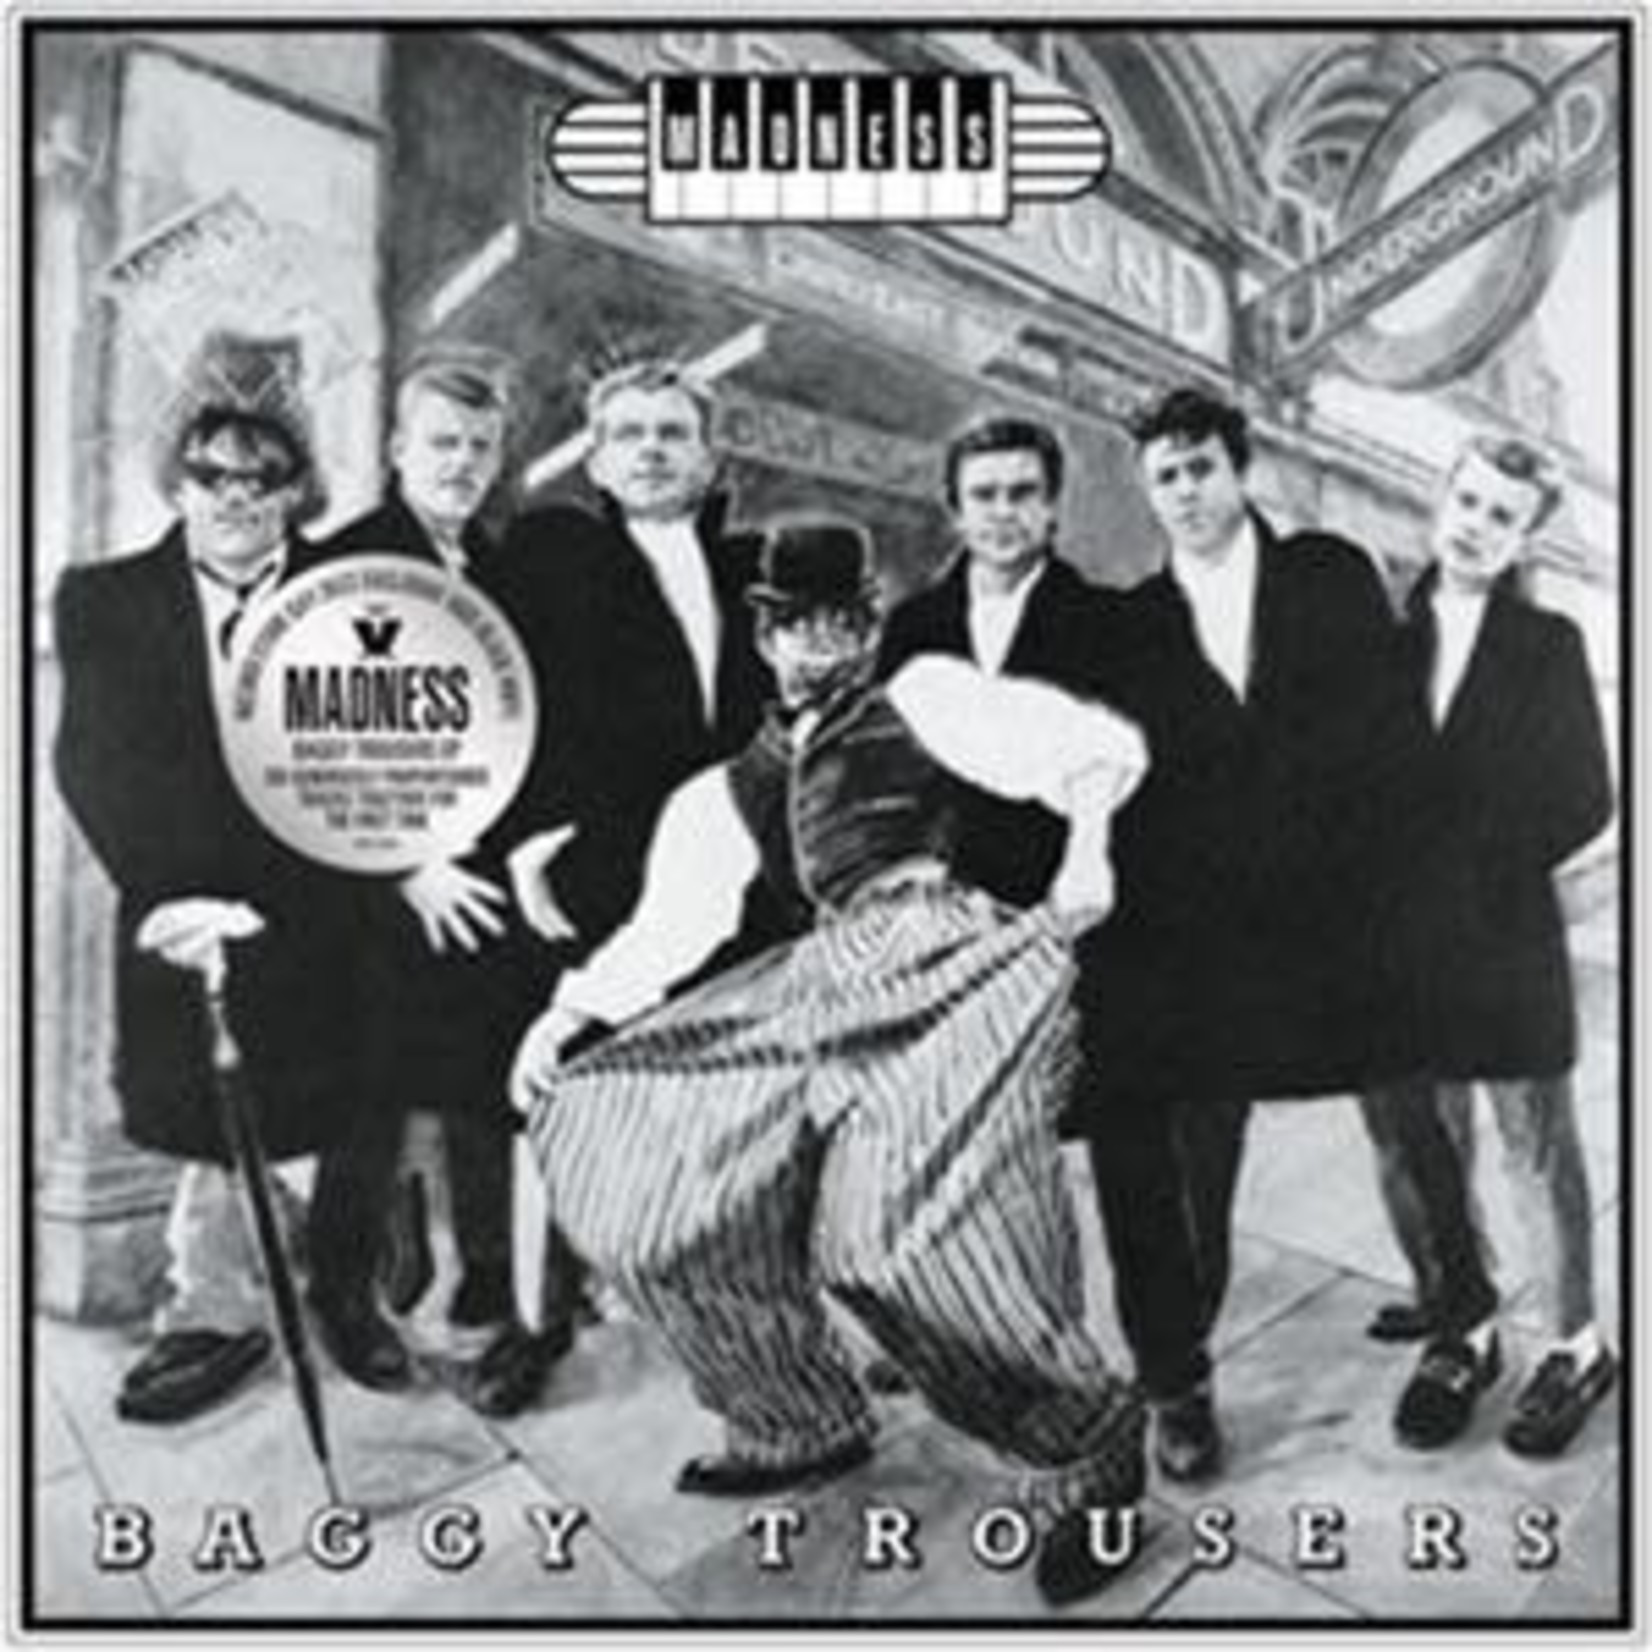 MADNESS - BAGGY TROUSERS -RSD- (VINYL)